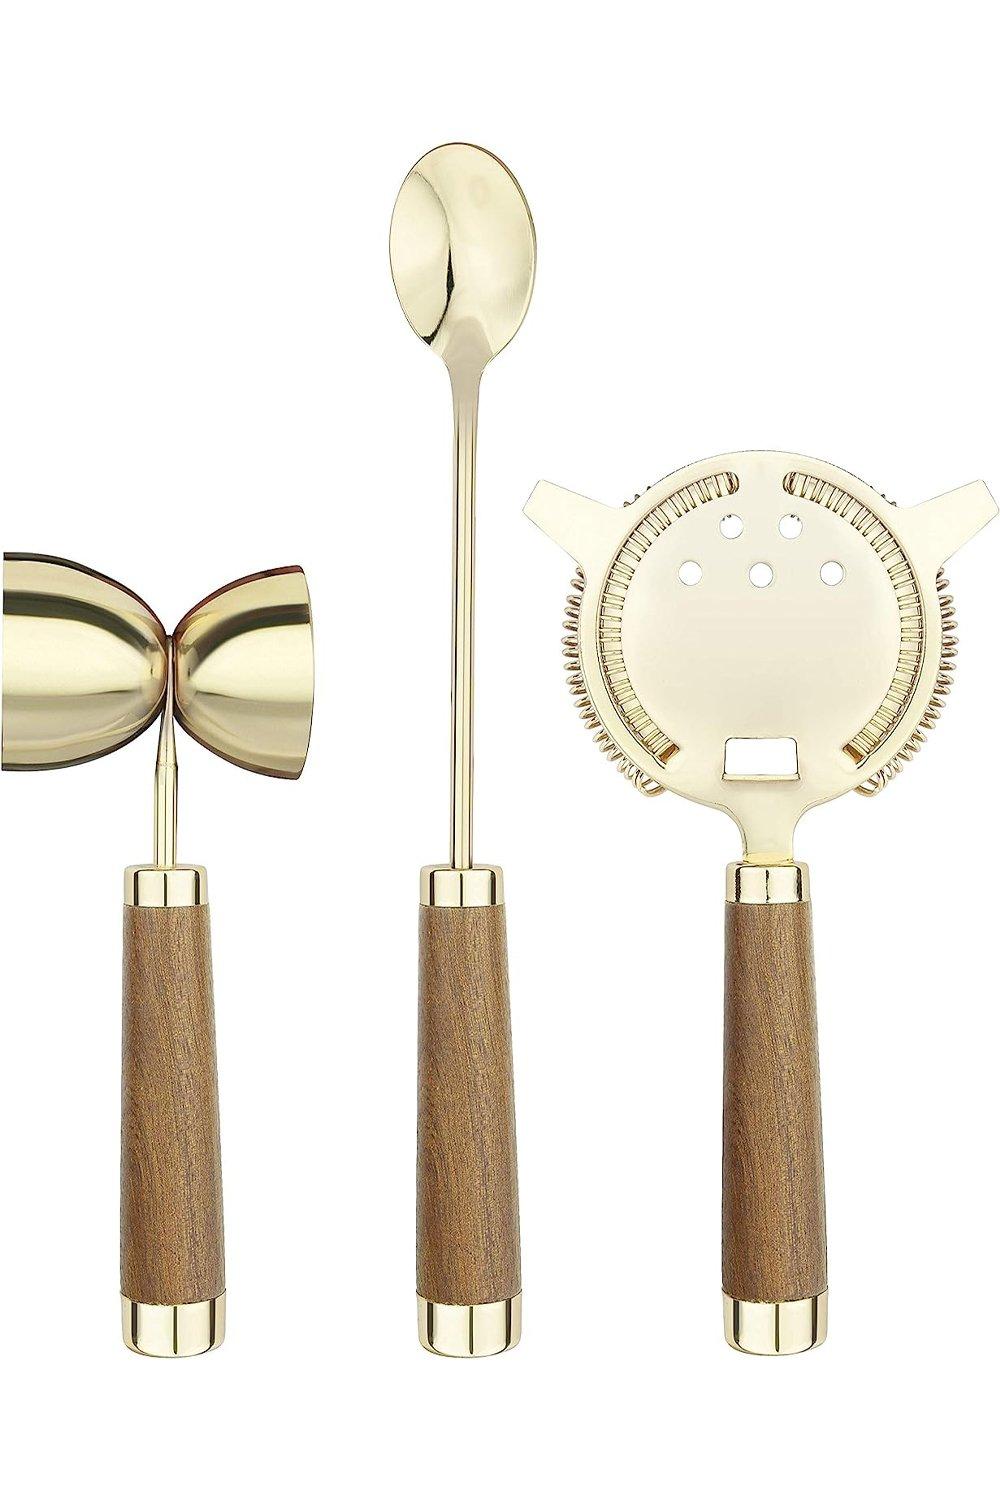 Brass Mixing Set with Solid Wood Handles